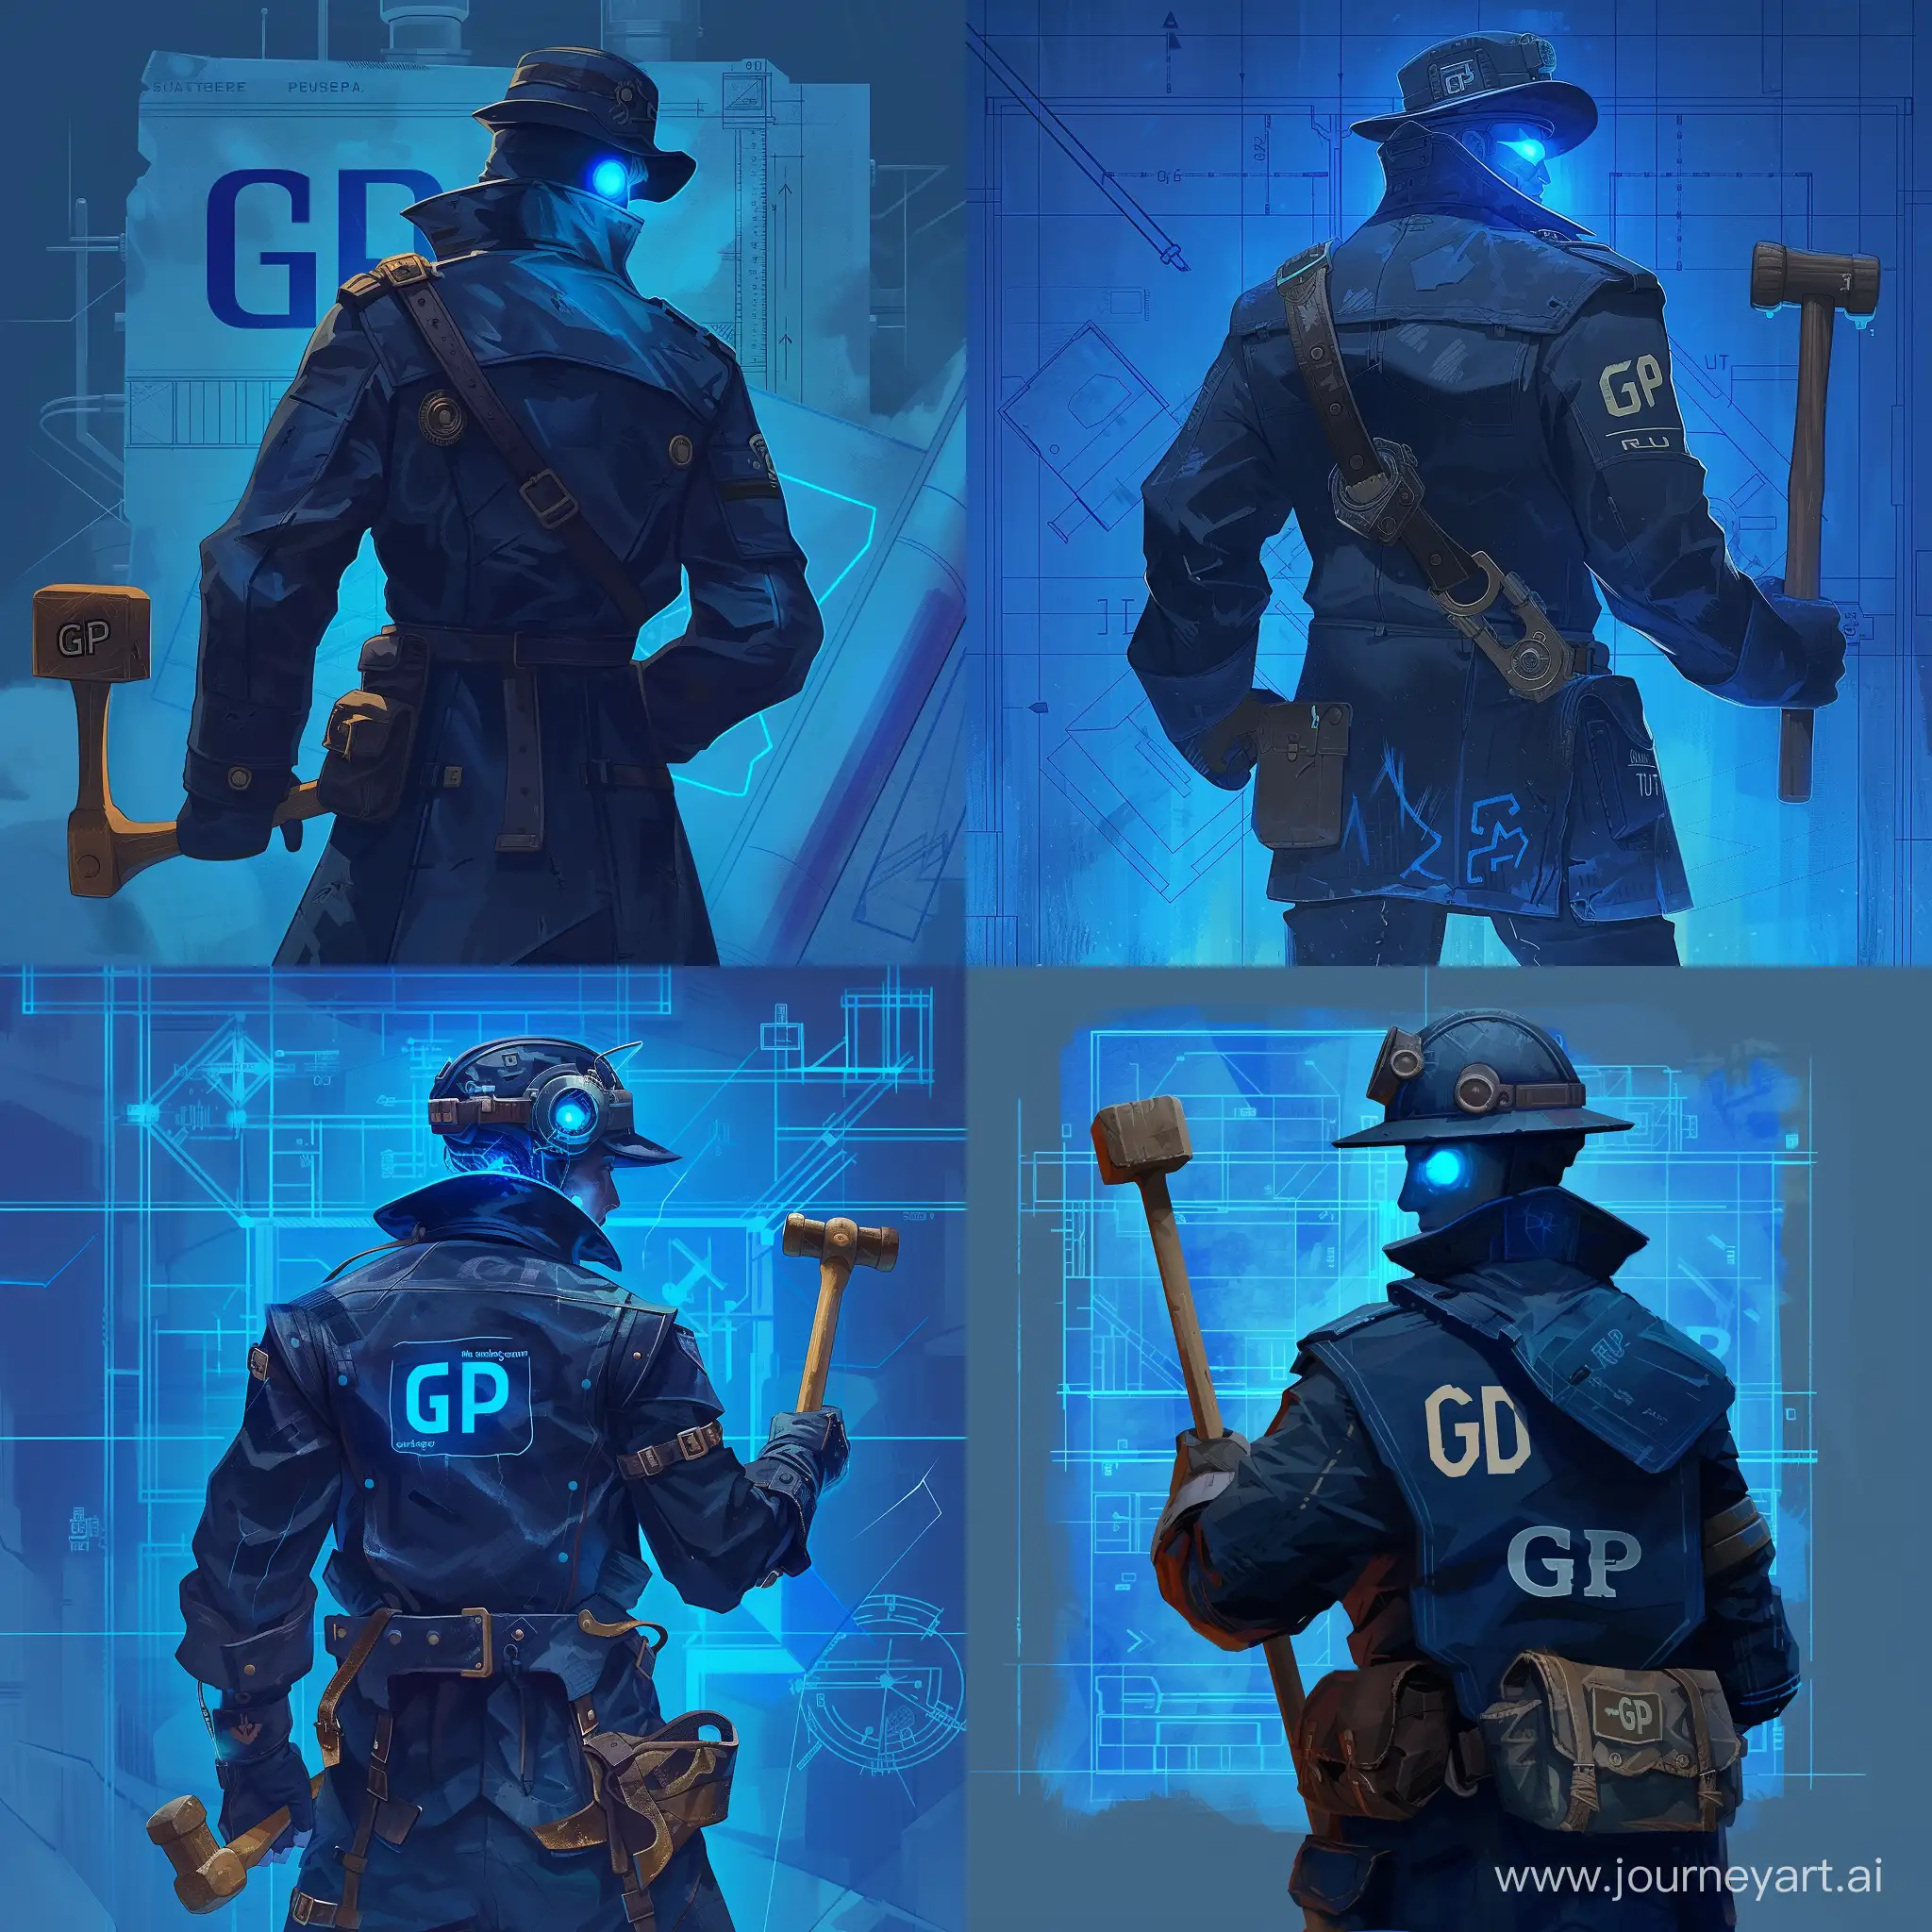 RUST-Game-Character-in-DarkBlue-Uniform-with-Miners-Hat-and-Glowing-Blue-Eyes